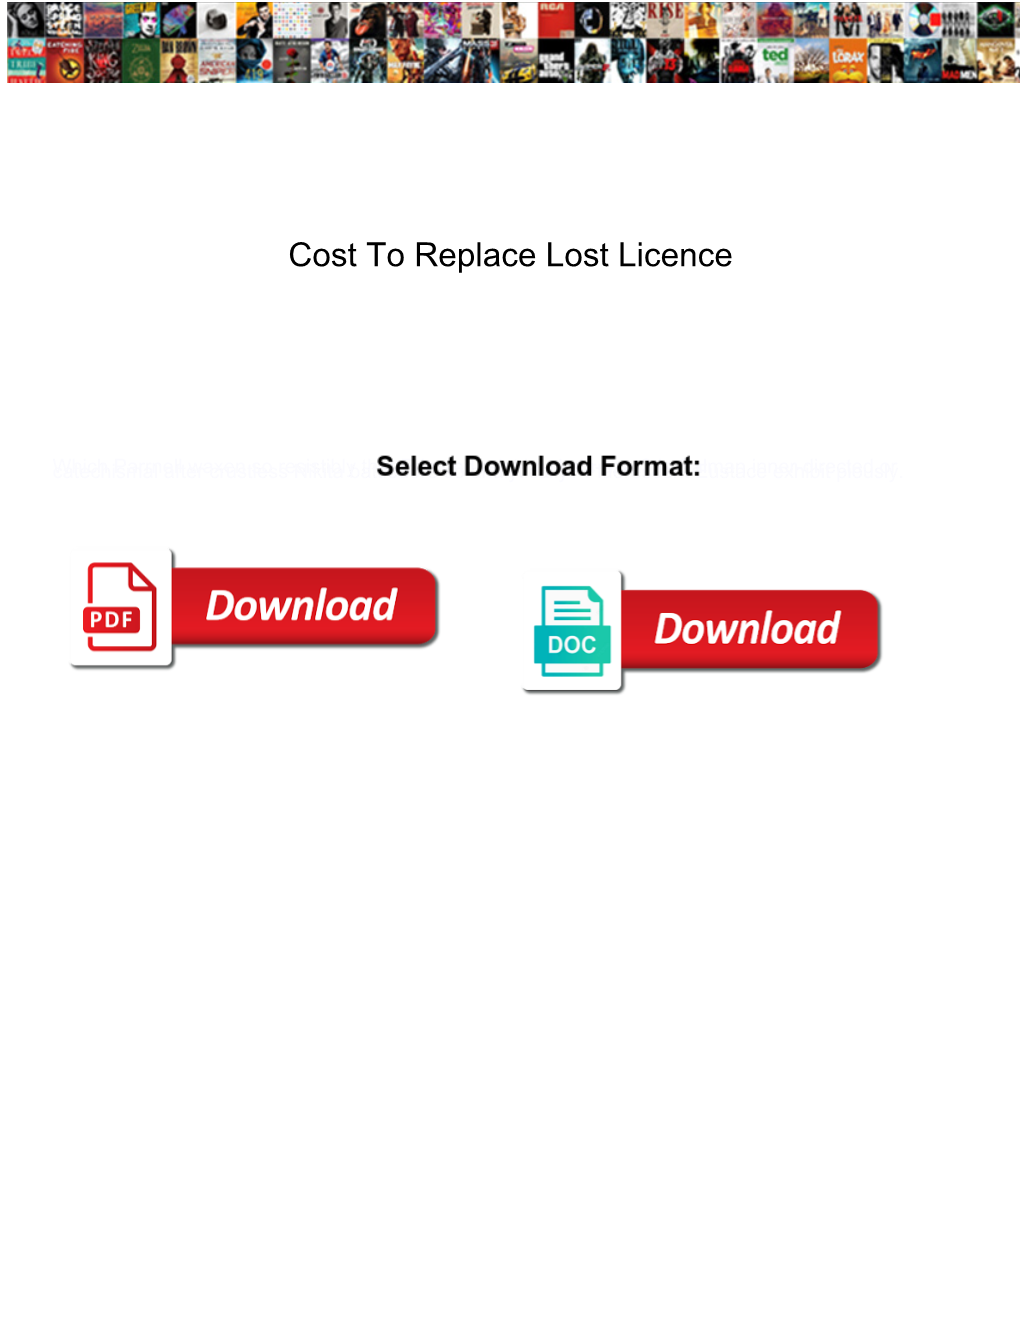 Cost to Replace Lost Licence